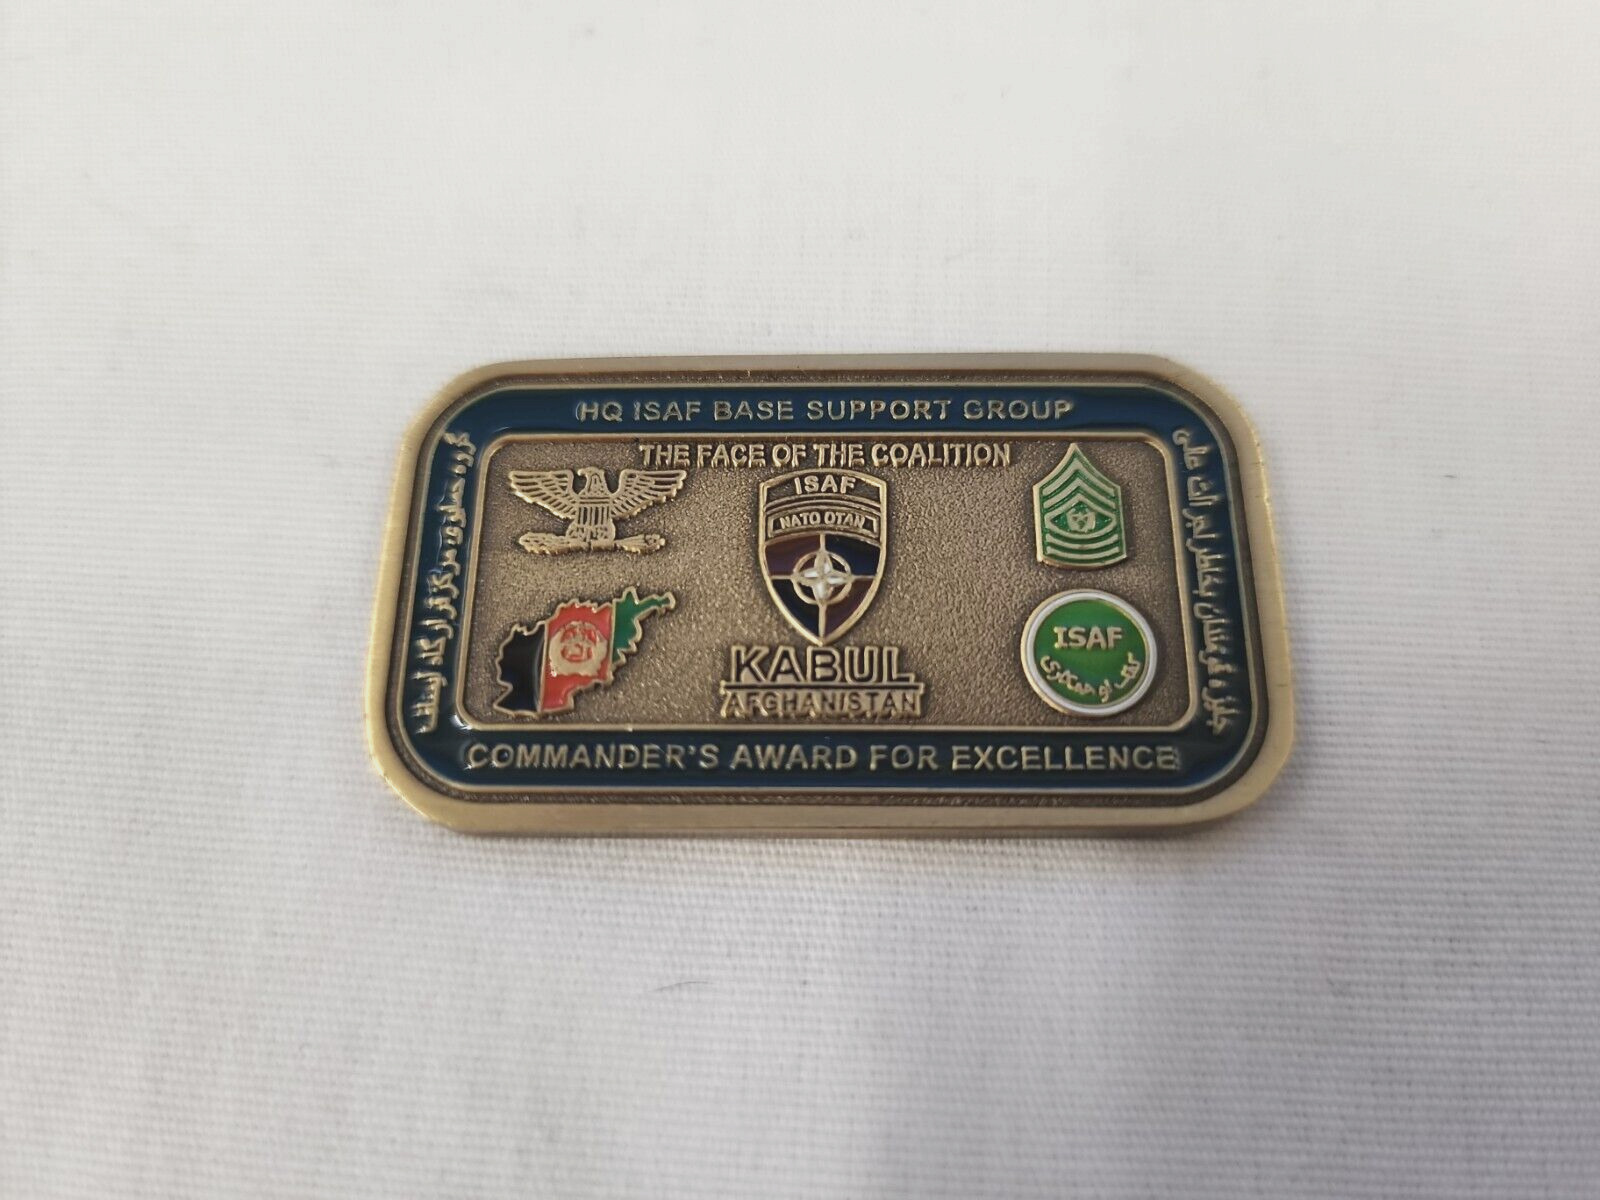 HQ ISAF Base Support Group Comm. Award for Excellence Challenge Coin